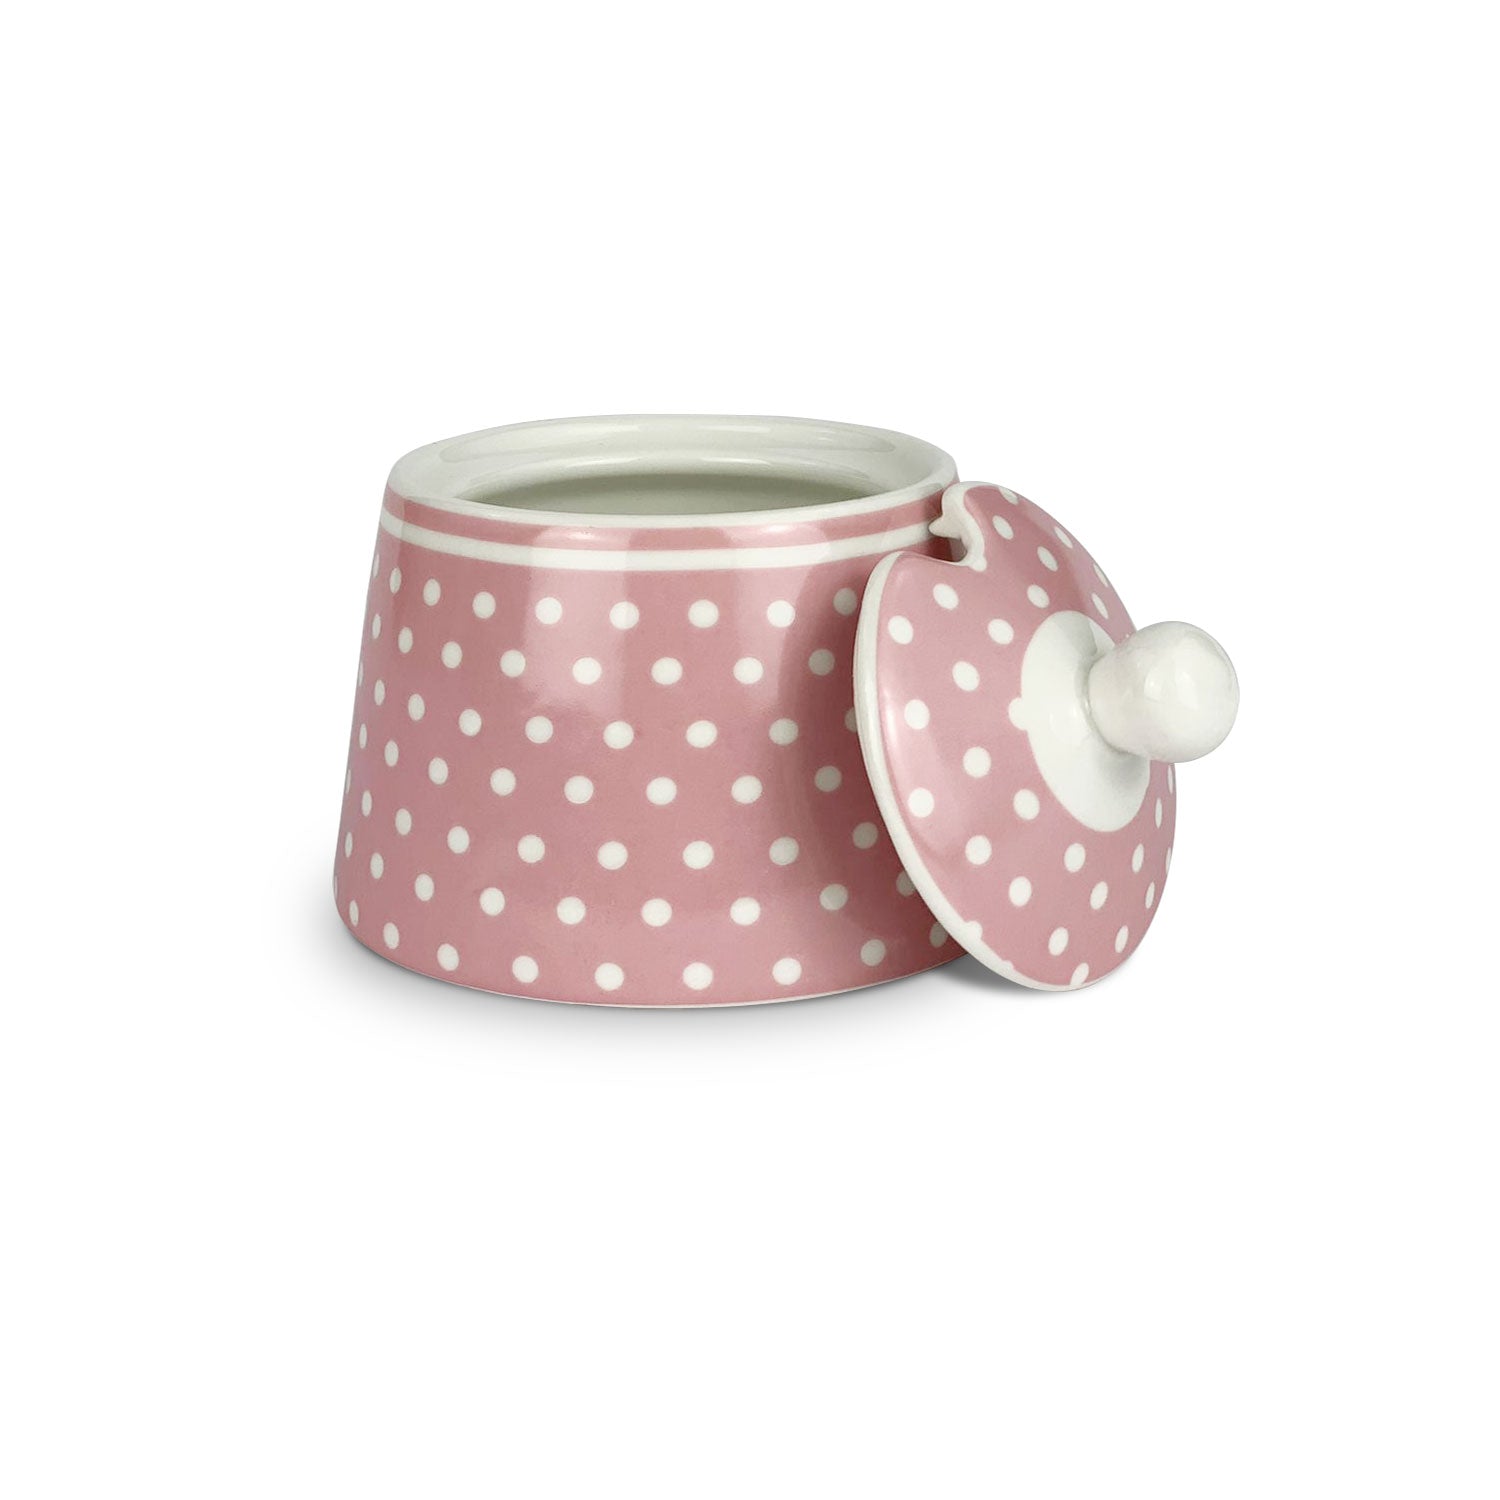 Zuccheriera in porcellana Isabelle Rose a pois Shabby chic rotonda 5067